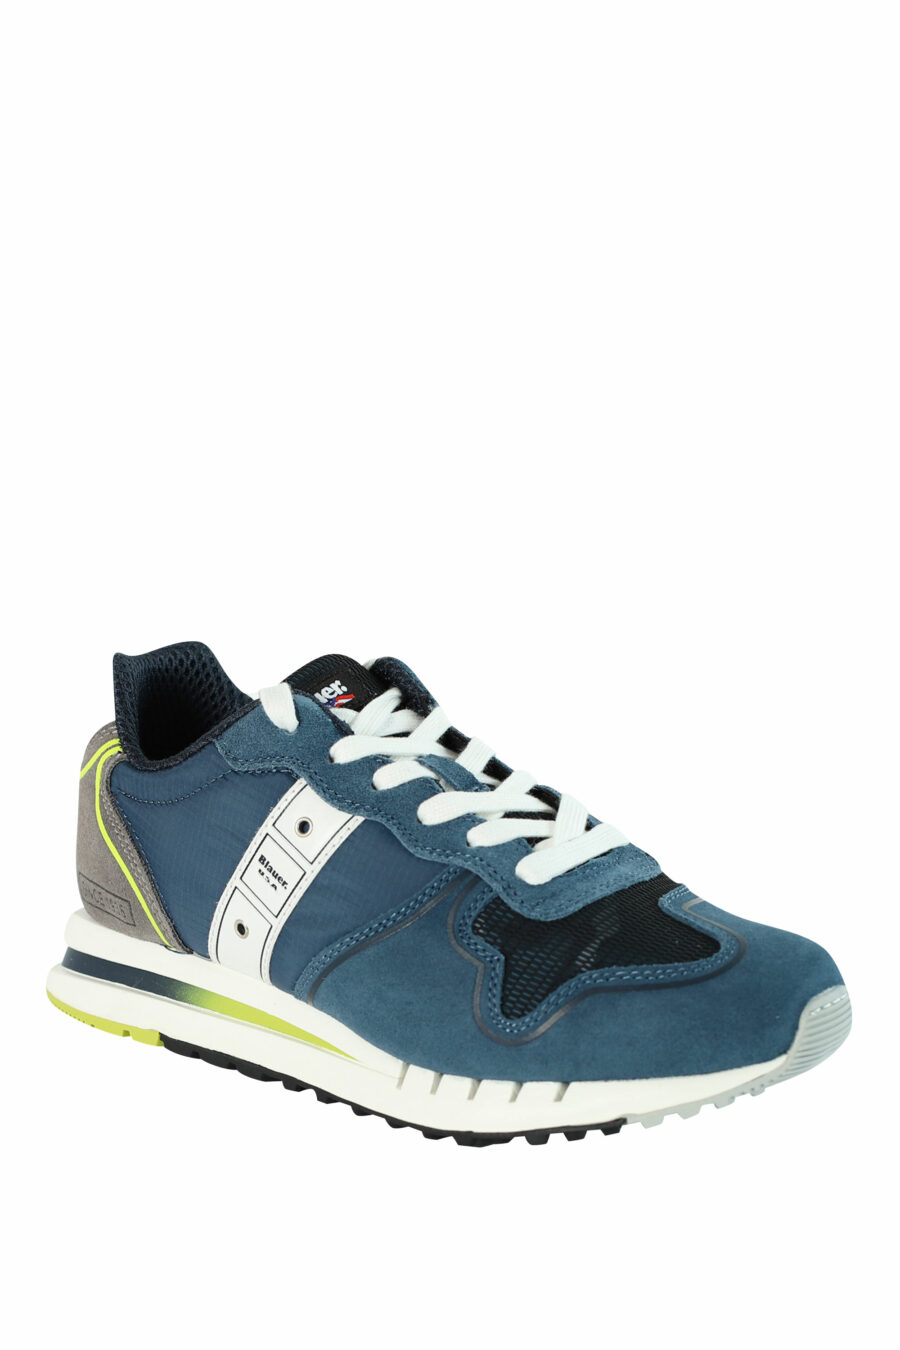 Trainers "QUARTZ" blue with grey and yellow details - 8058156499119 2